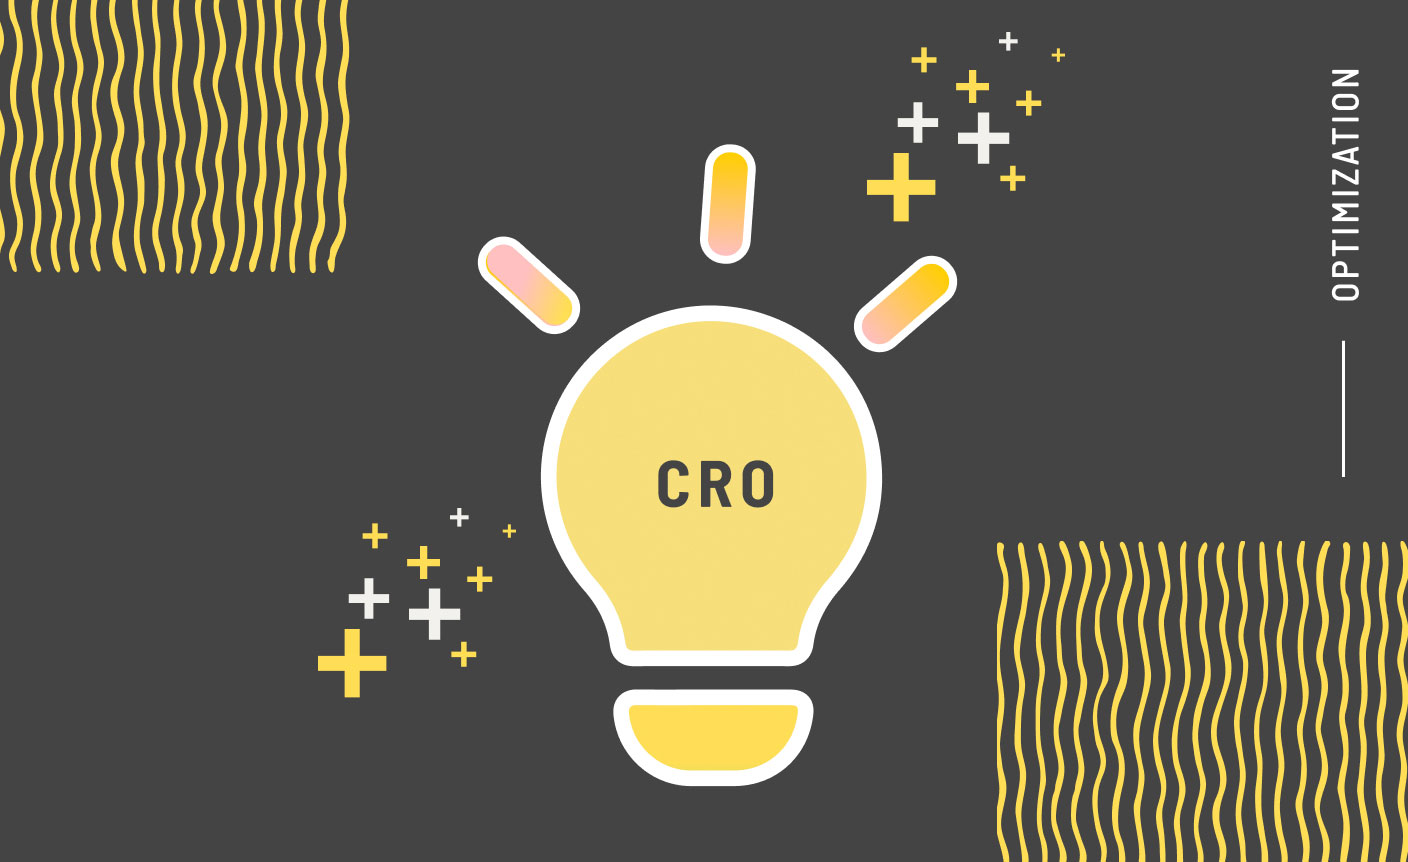 The Unbounce guide to conducting a CRO audit